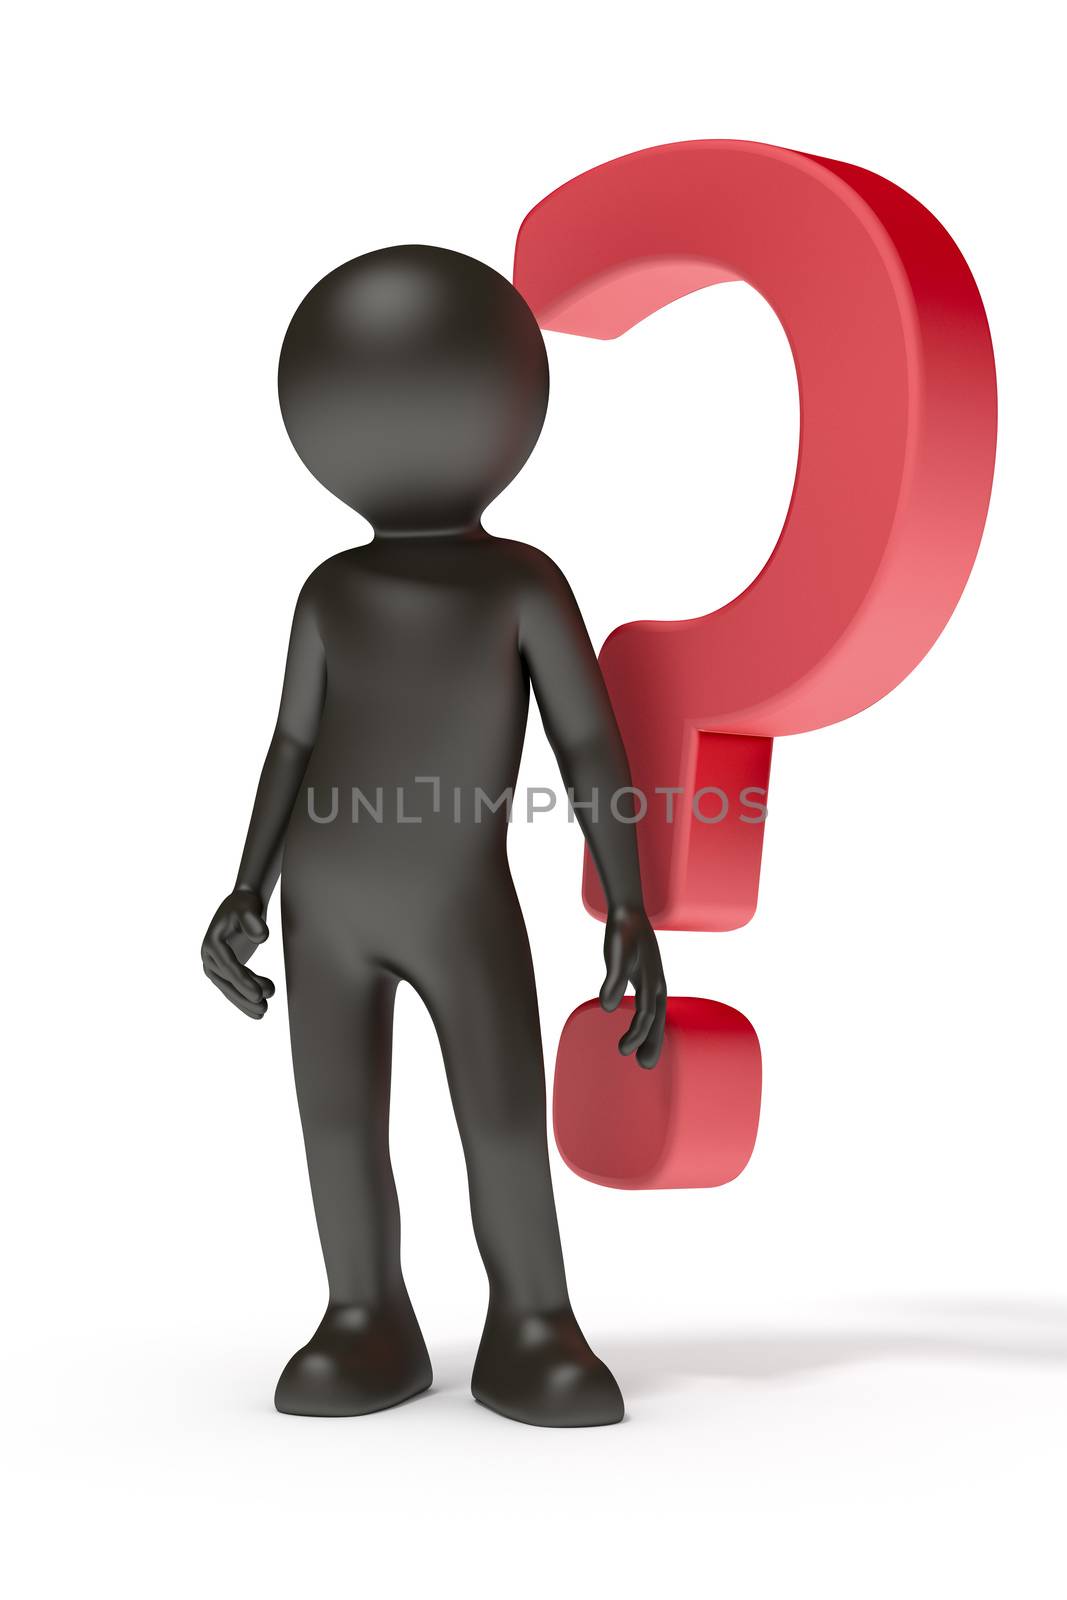 An image of a black man with a red question mark